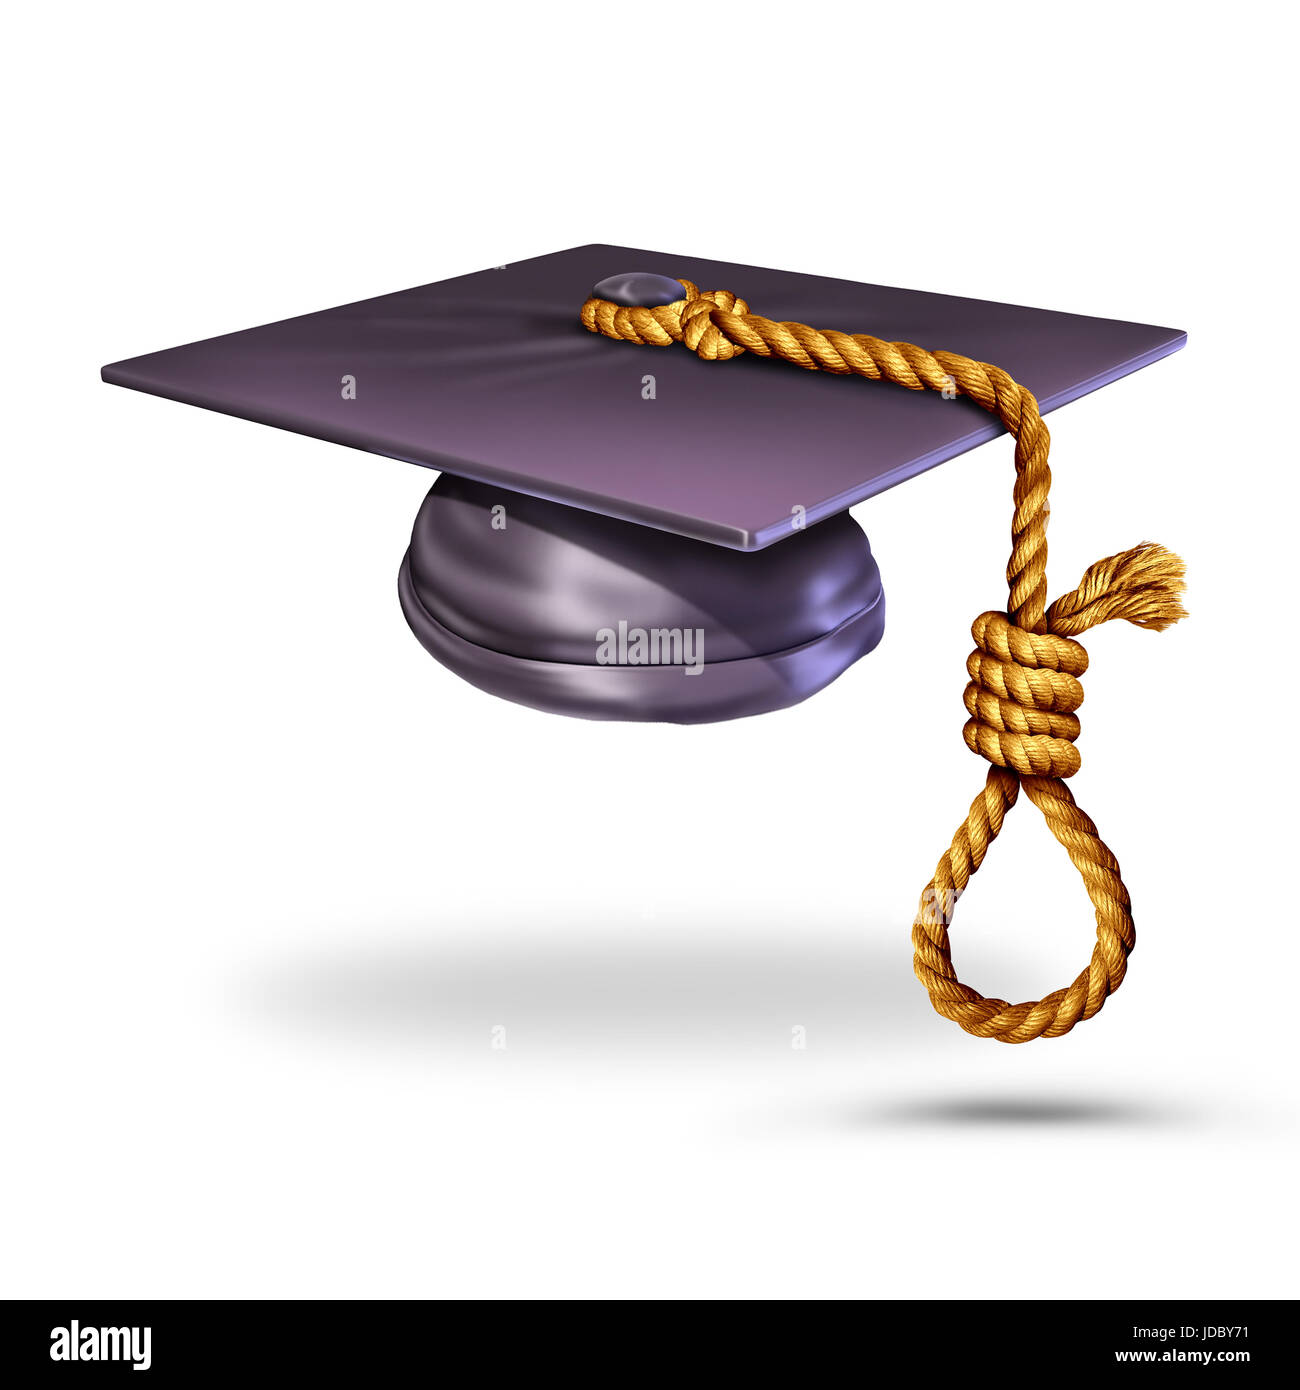 Education suicide concept and learning to prevent suicides symbol as a graduation cap or mortar board with a tassle shaped as a noose knot. Stock Photo